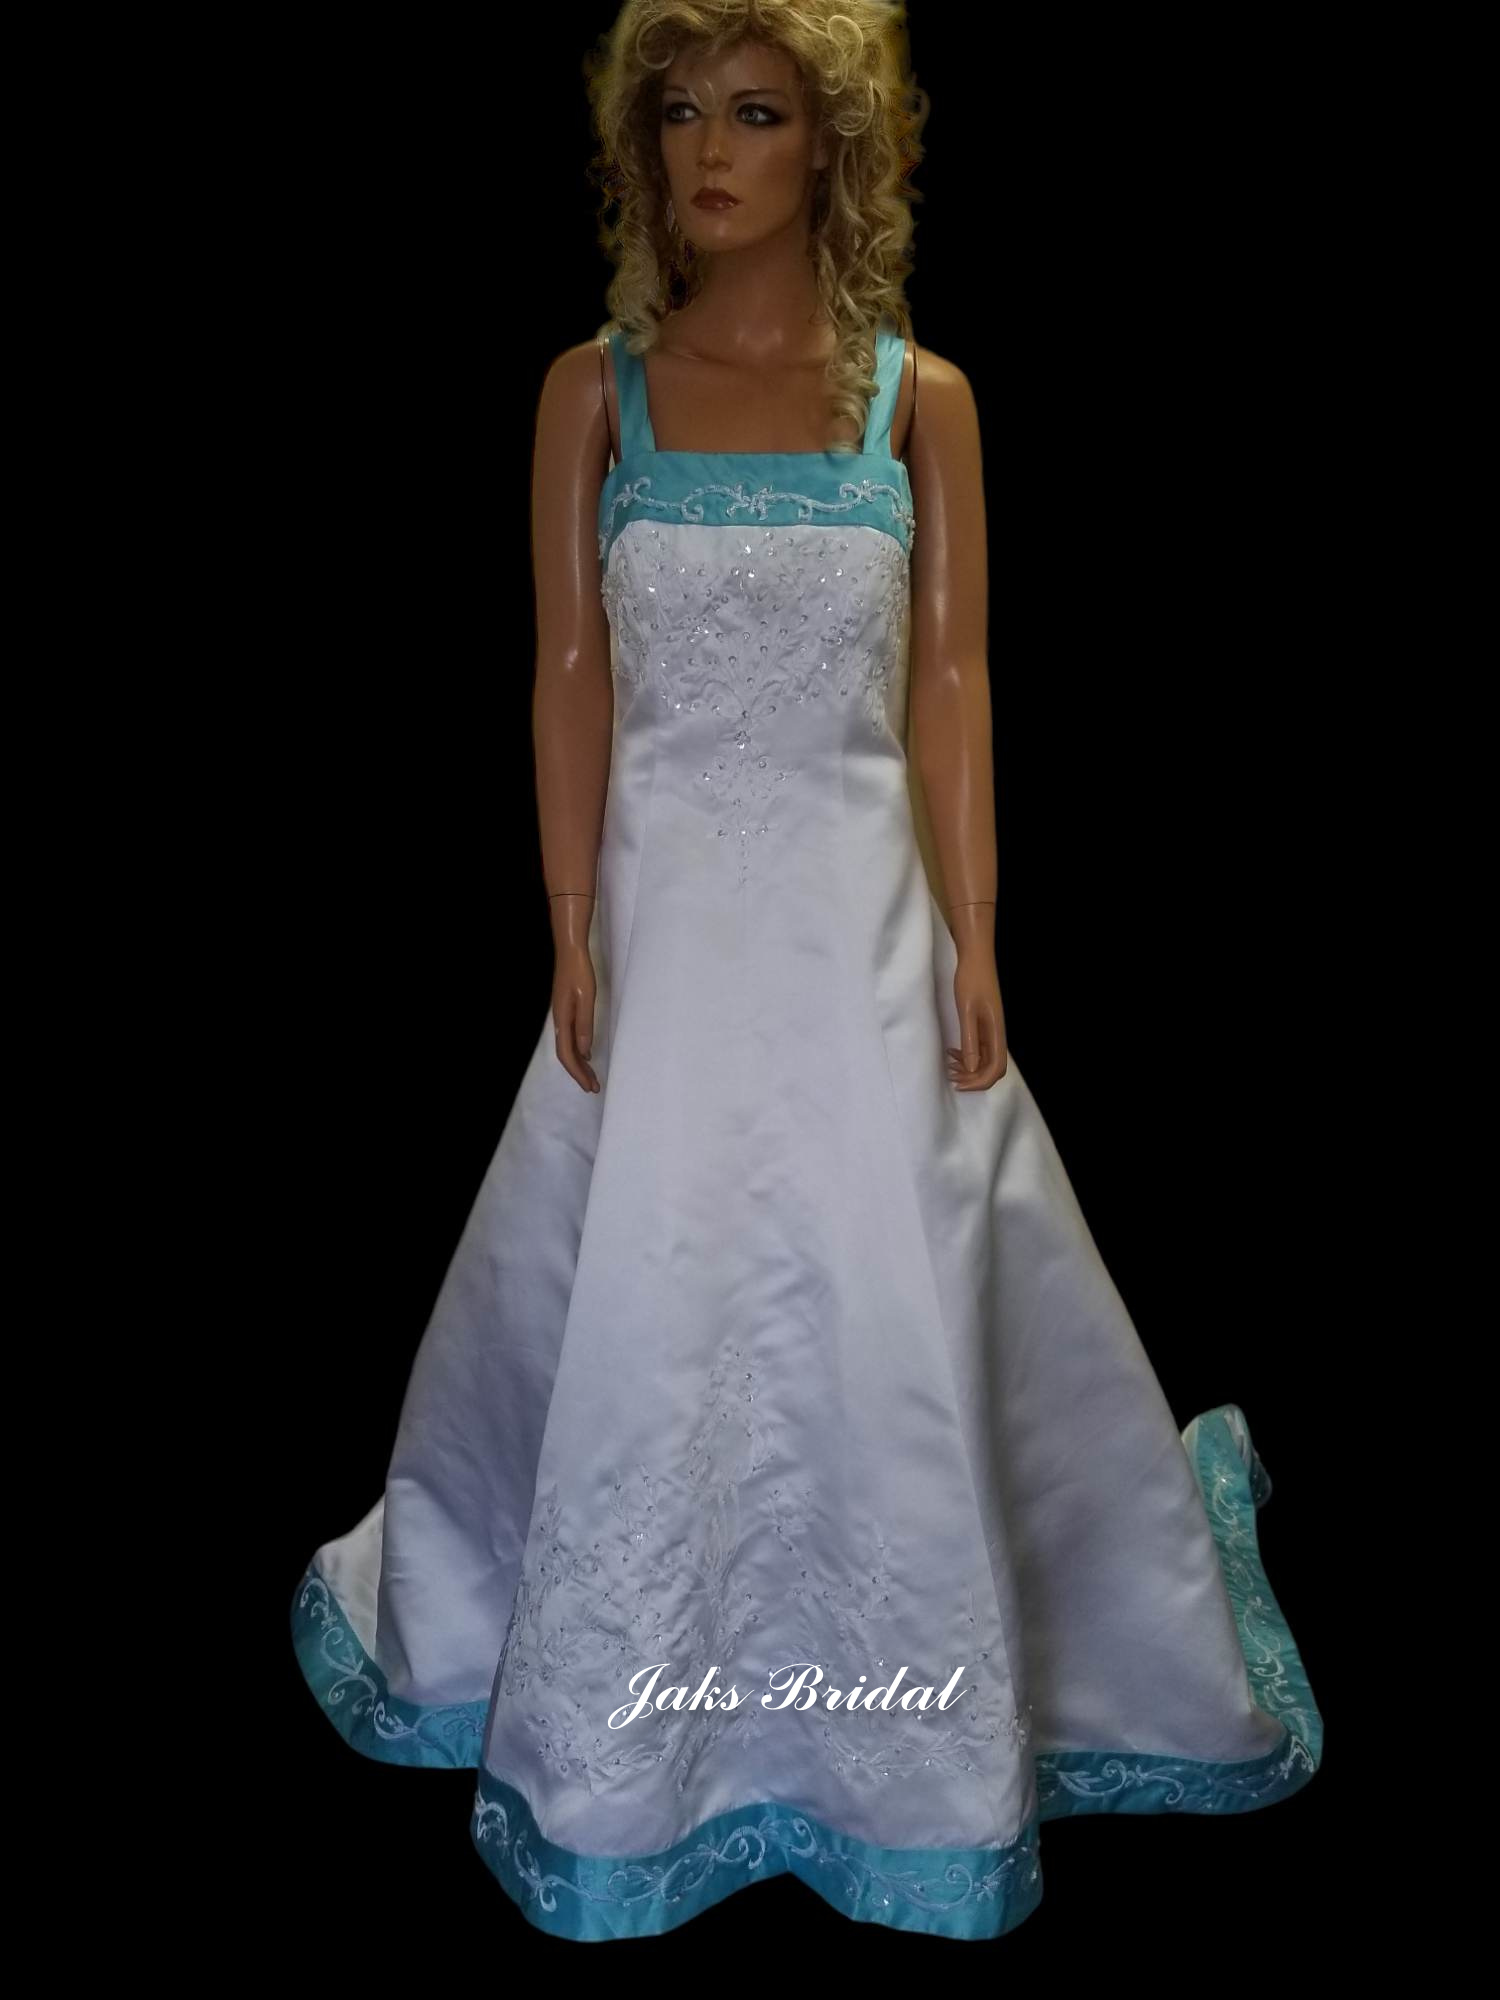 bride and flower girl dresses in blue and white 